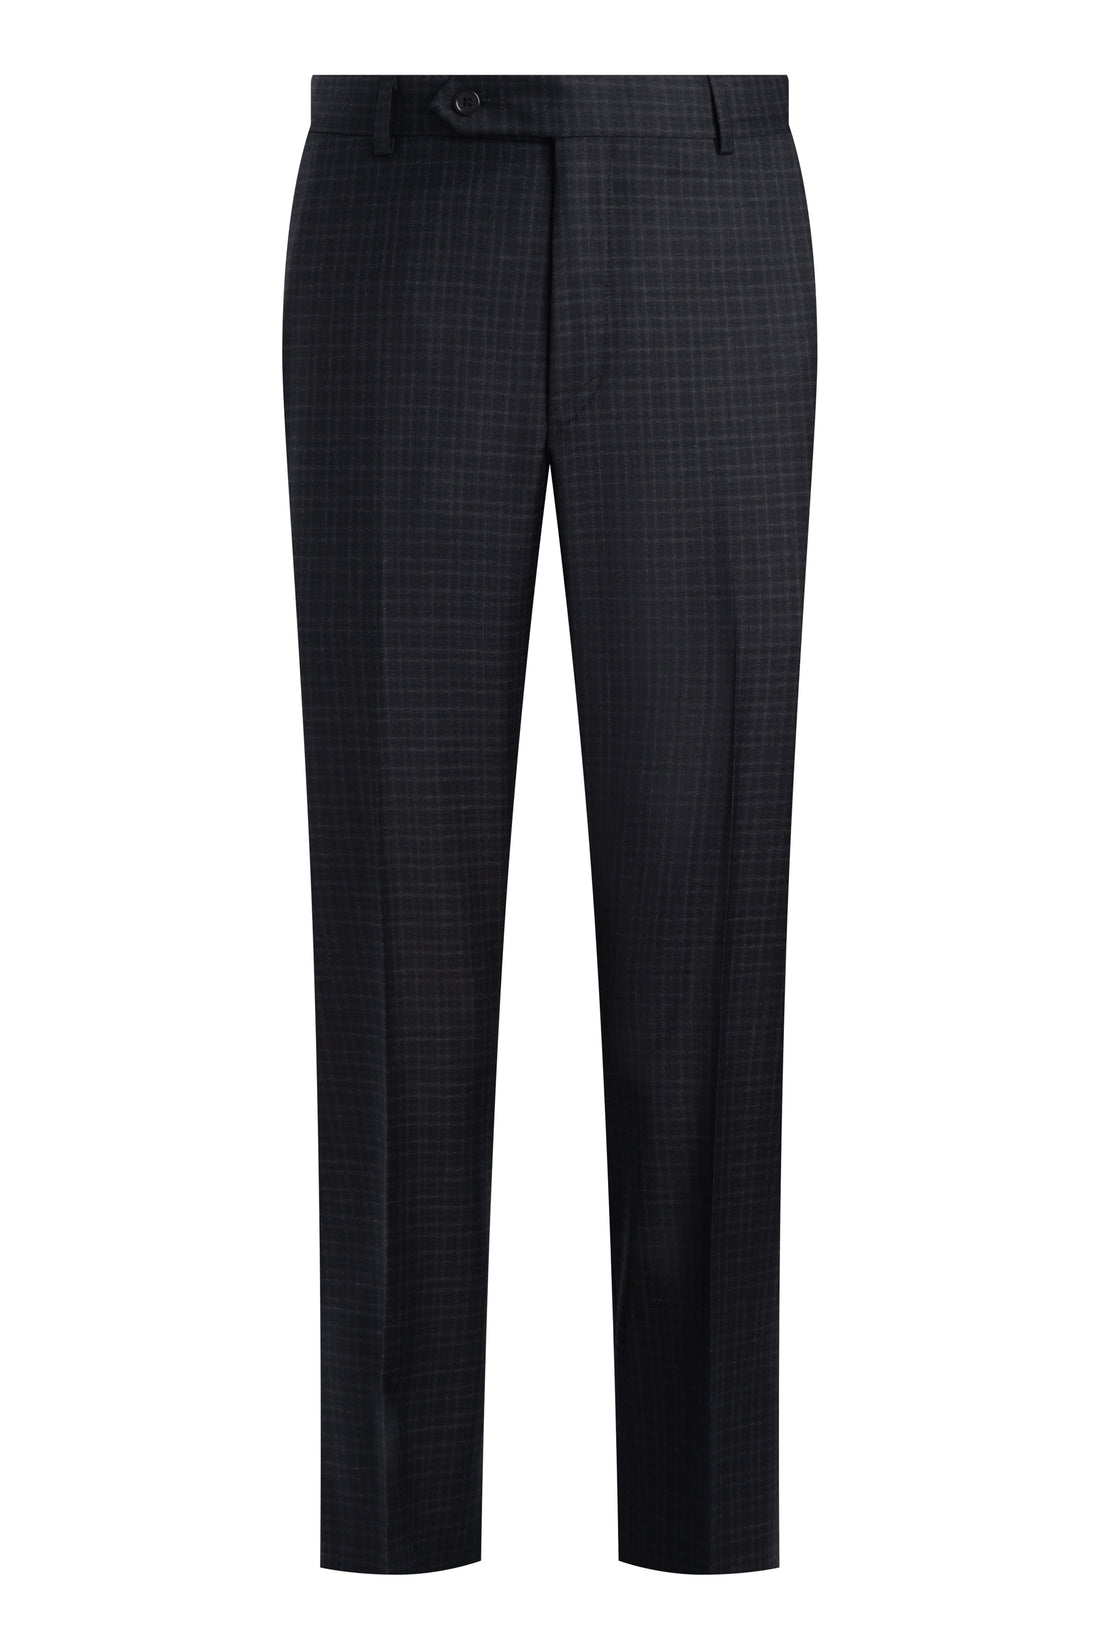 Charcoal and Graphite 110's Check Suit